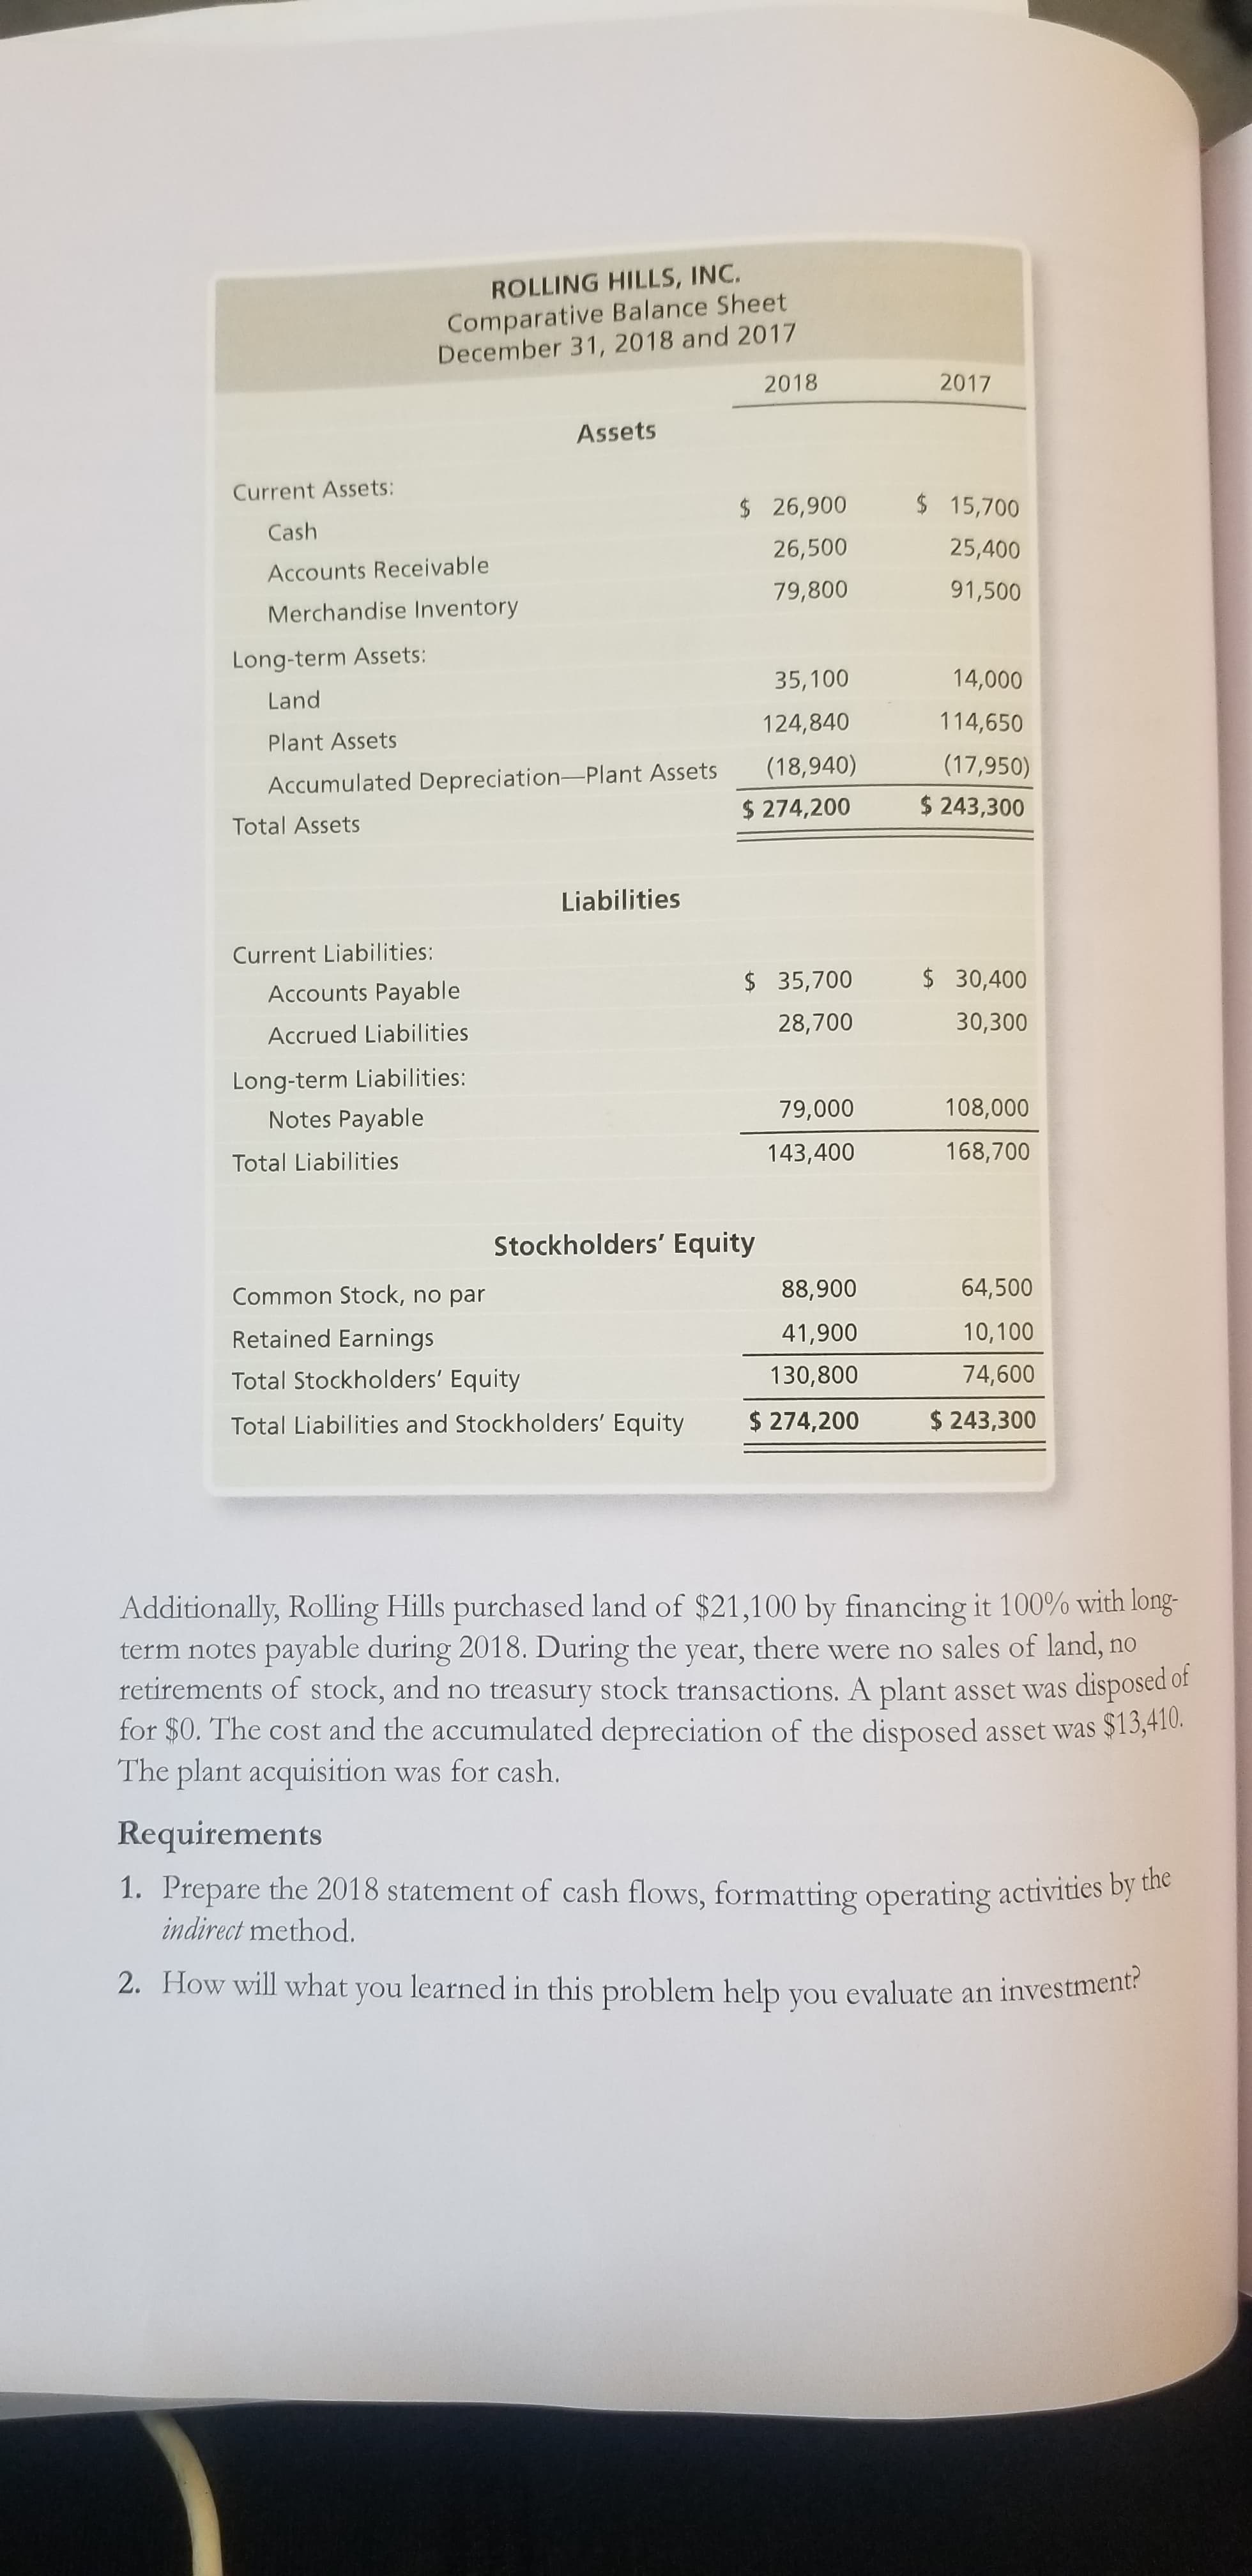 ROLLING HILLS, INC.
Comparative Balance Sheet
December 31, 2018 and 2017
2018
2017
Assets
Current Assets:
$ 15,700
$ 26,900
Cash
25,400
26,500
Accounts Receivable
91,500
79,800
Merchandise Inventory
Long-term Assets:
14,000
35,100
Land
114,650
124,840
Plant Assets
(17,950)
(18,940)
Accumulated Depreciation-Plant Assets
$ 243,300
$ 274,200
Total Assets
Liabilities
Current Liabilities:
$ 30,400
$ 35,700
Accounts Payable
30,300
28,700
Accrued Liabilities
Long-term Liabilities:
108,000
79,000
Notes Payable
168,700
143,400
Total Liabilities
Stockholders' Equity
64,500
88,900
Common Stock, no par
10,100
41,900
Retained Earnings
74,600
130,800
Total Stockholders' Equity
$ 243,300
$274,200
Total Liabilities and Stockholders' Equity
Additionally, Rolling Hills purchased land of $21,100 by financing it 100% with long
term notes payable during 2018. During the year, there were no sales of land, no
retirements of stock, and no treasury stock transactions. A plant asset was
for $0. The cost and the accumulated depreciation of the disposed asset was $13,410.
The plant acquisition was for cash.
disposed of
Requirements
1. Prepare the 2018 statement of cash flows, formatting operating activities by the
indirect method.
2. How will what
learned in this problem help you evaluate an investment?
you
